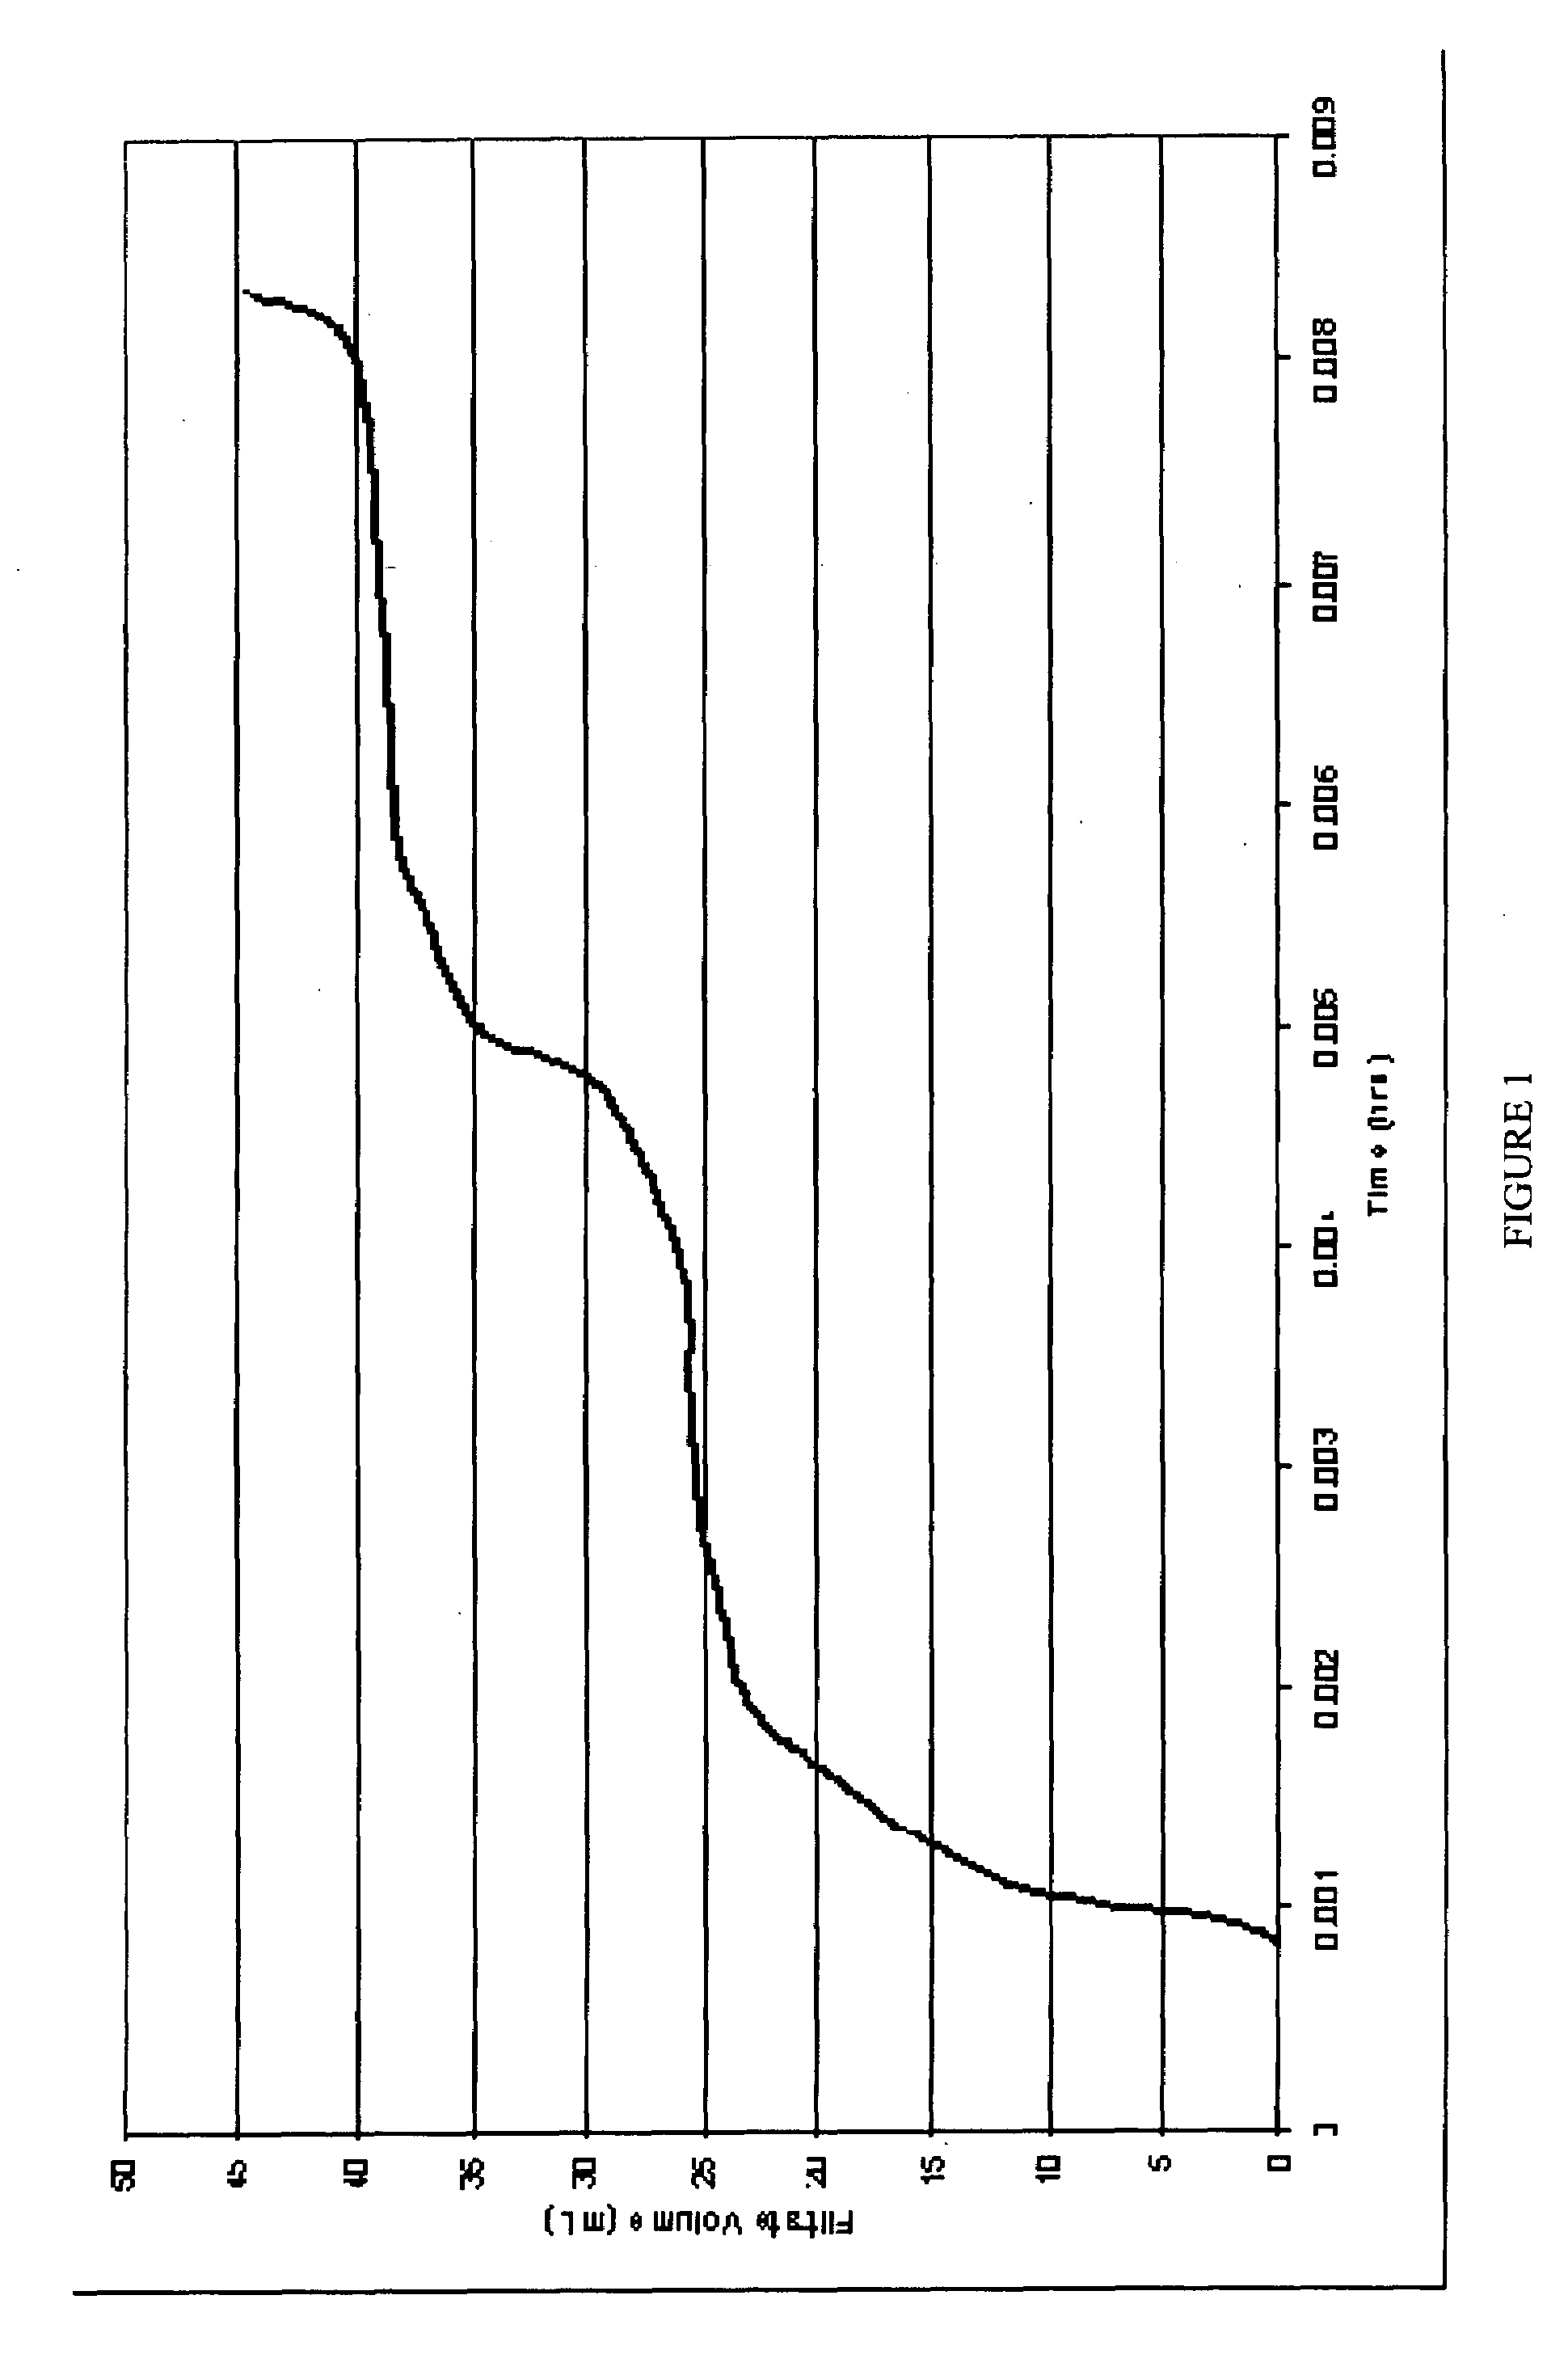 Methods for treating a subterranean formation with a treatment fluid containing a gelling agent and subsequently breaking the gel with an oxidizer